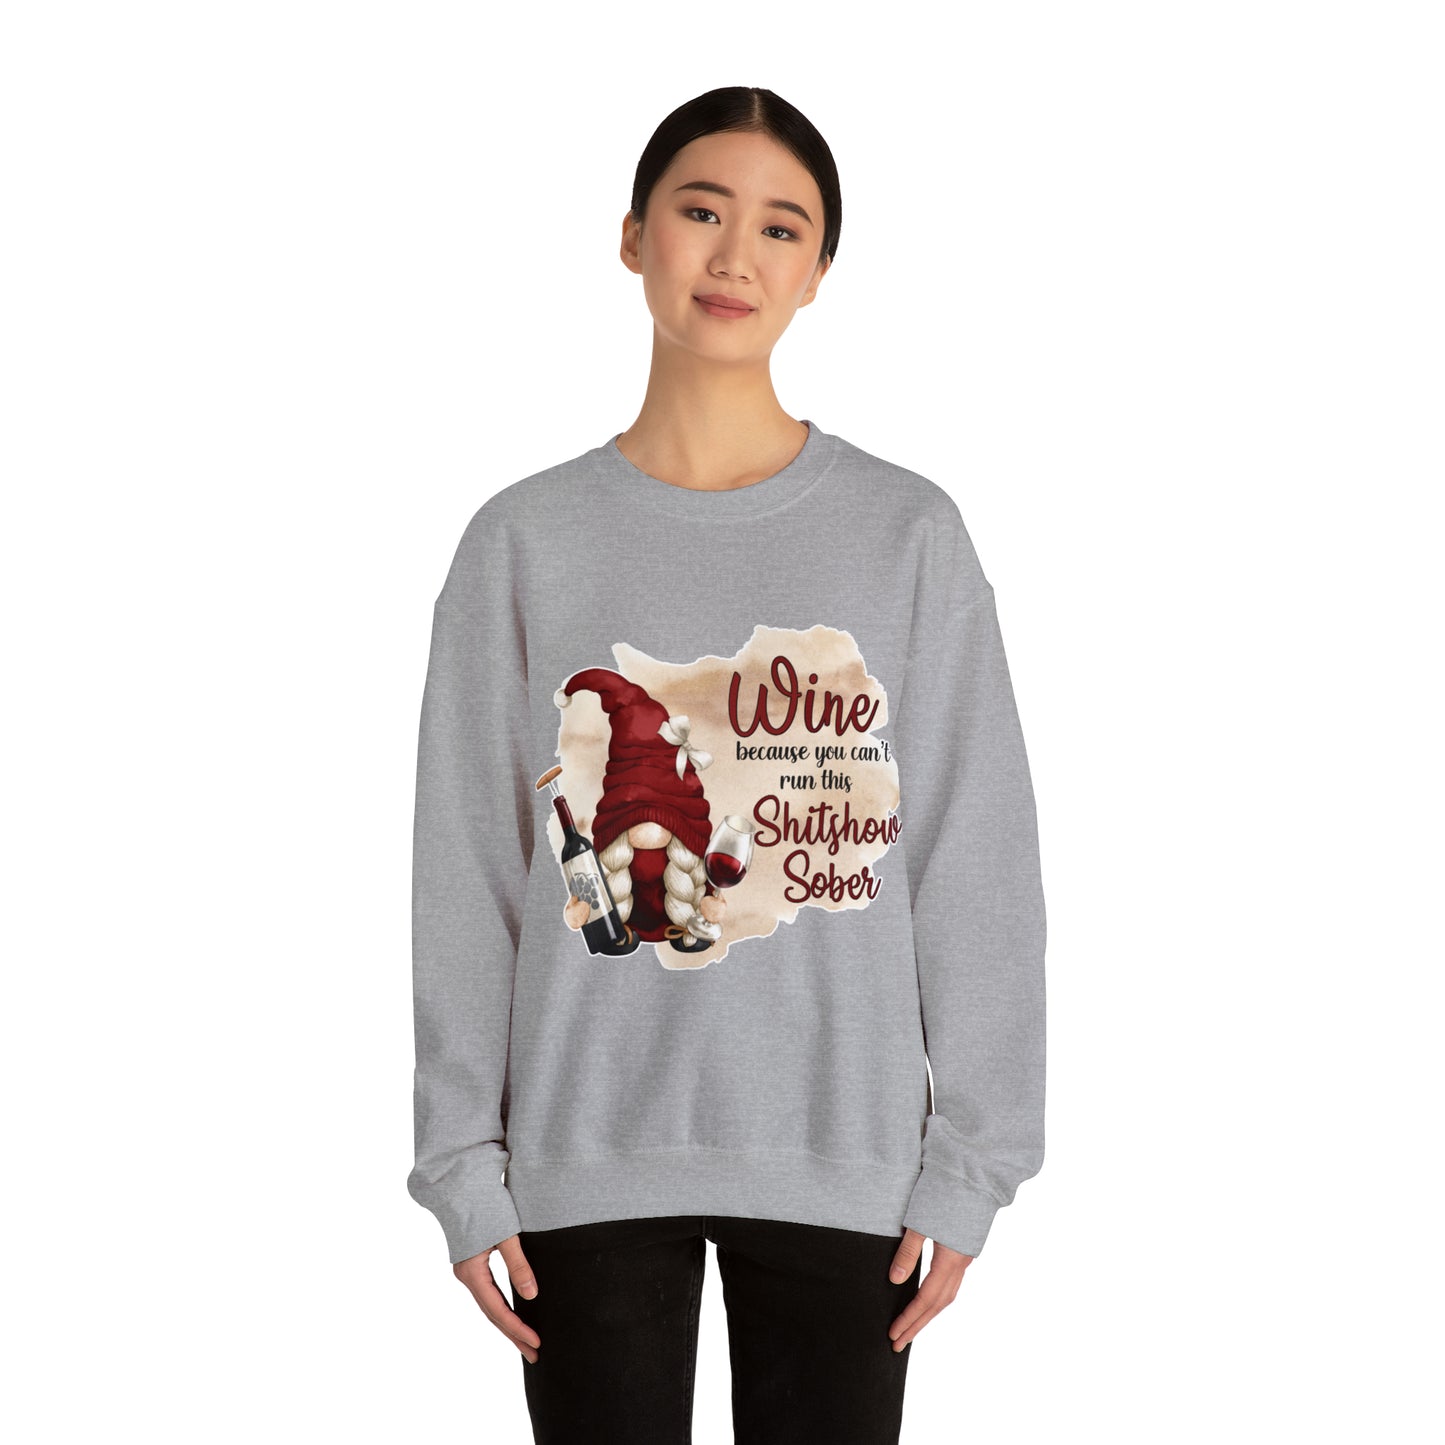 Wine, because you can't run this shitshow sober: Unisex Heavy Blend™ Crewneck Sweatshirt